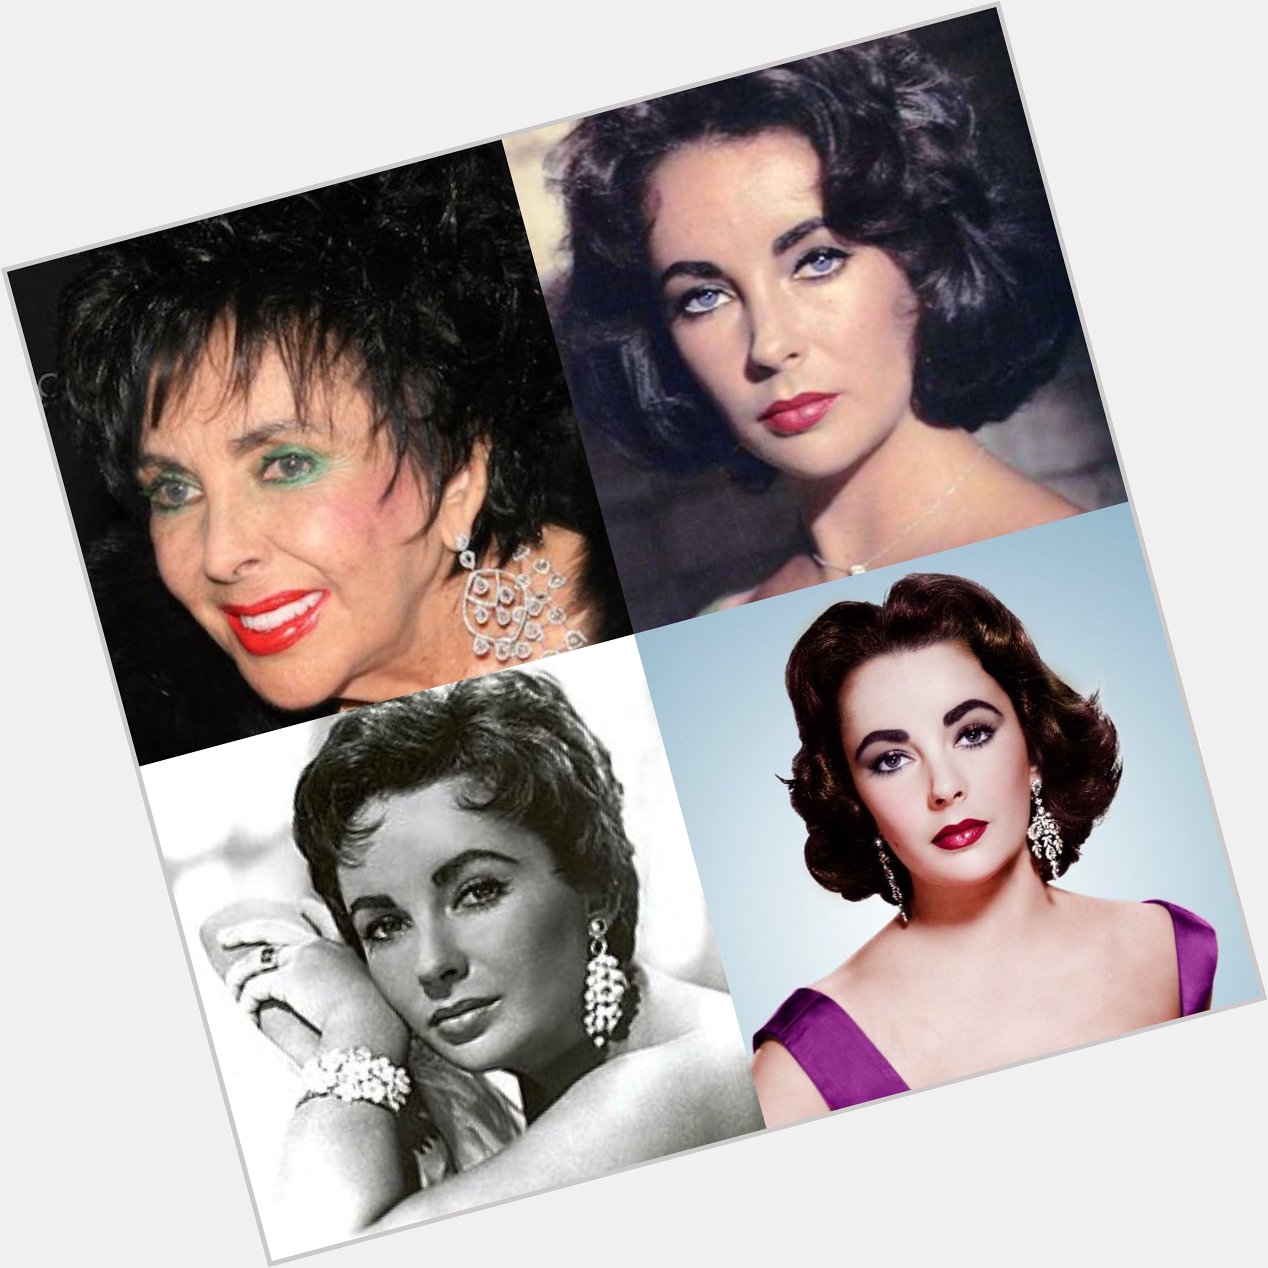 Happy 86 birthday to Elizabeth Taylor up in heaven. May she Rest In Peace.  